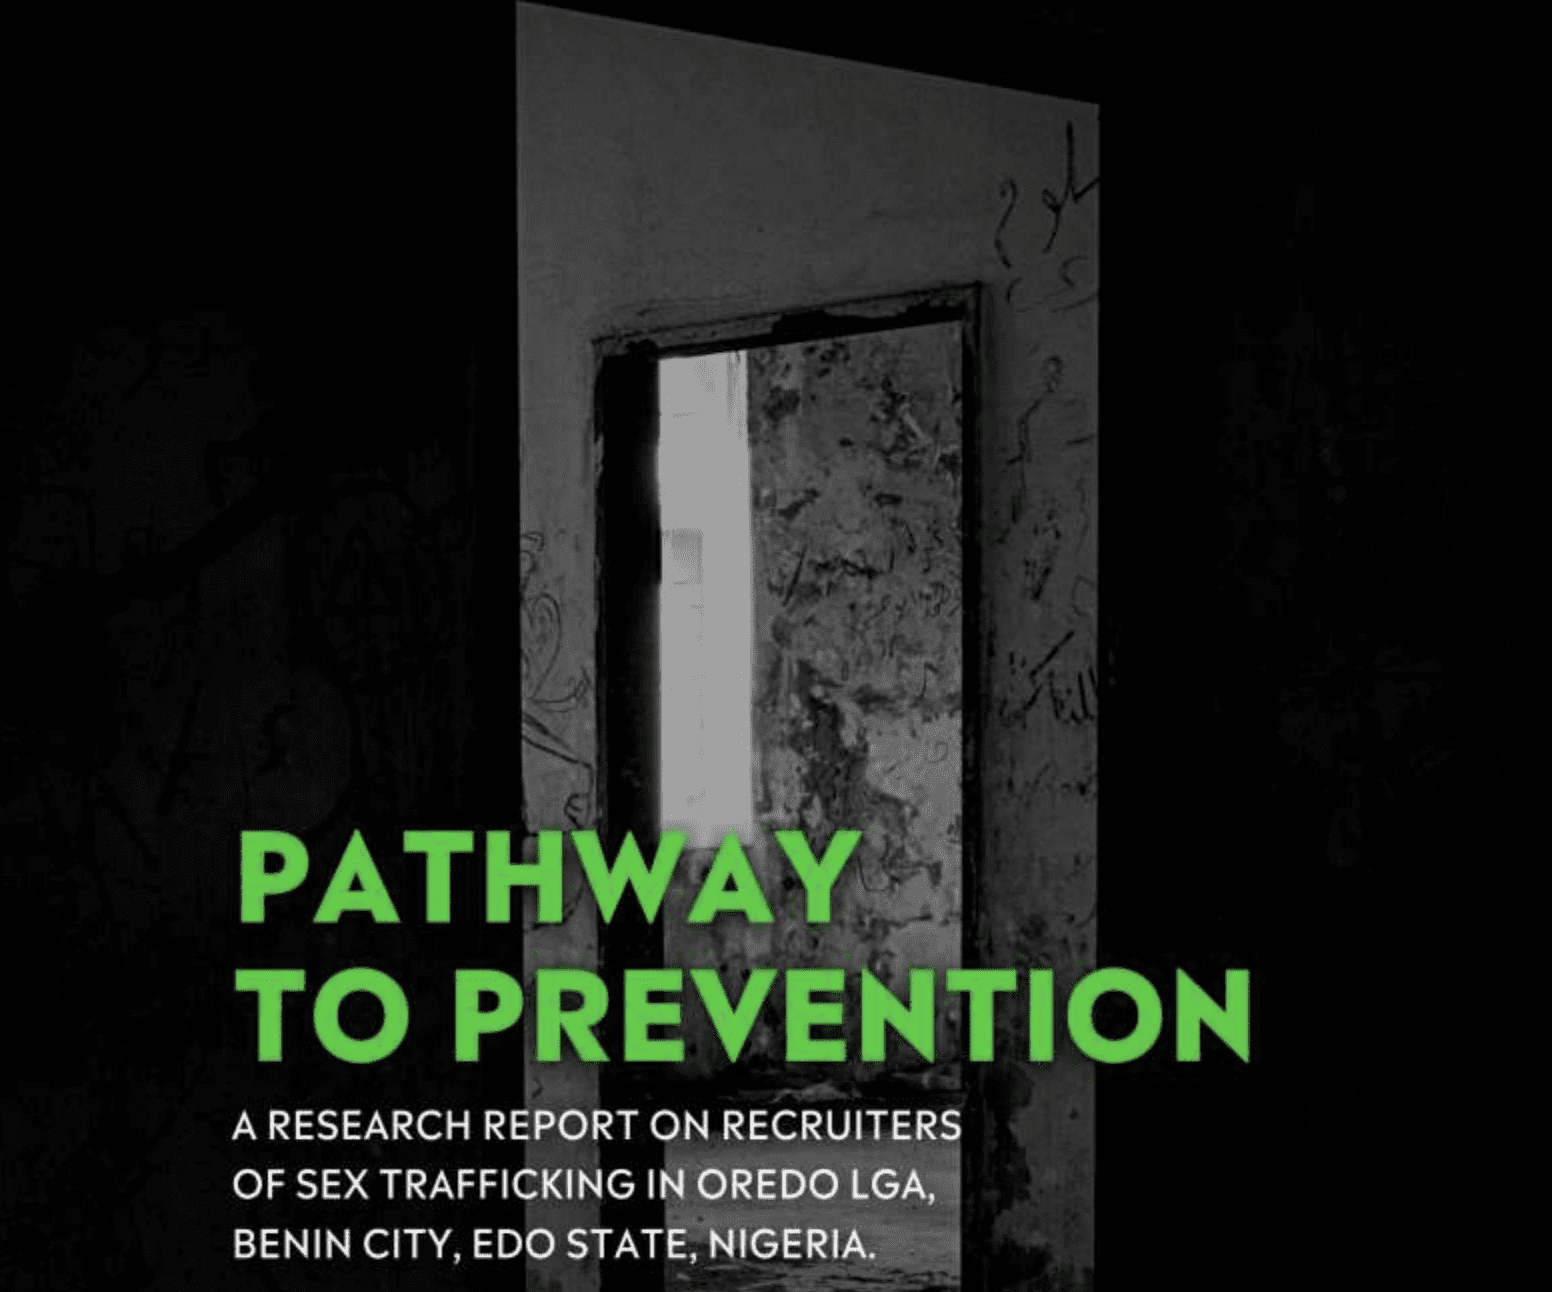 Pathway to Prevention: A Research Report on Recruiters of Sex Trafficking in Oredo LGA, Benin City, Edo State, Nigeria